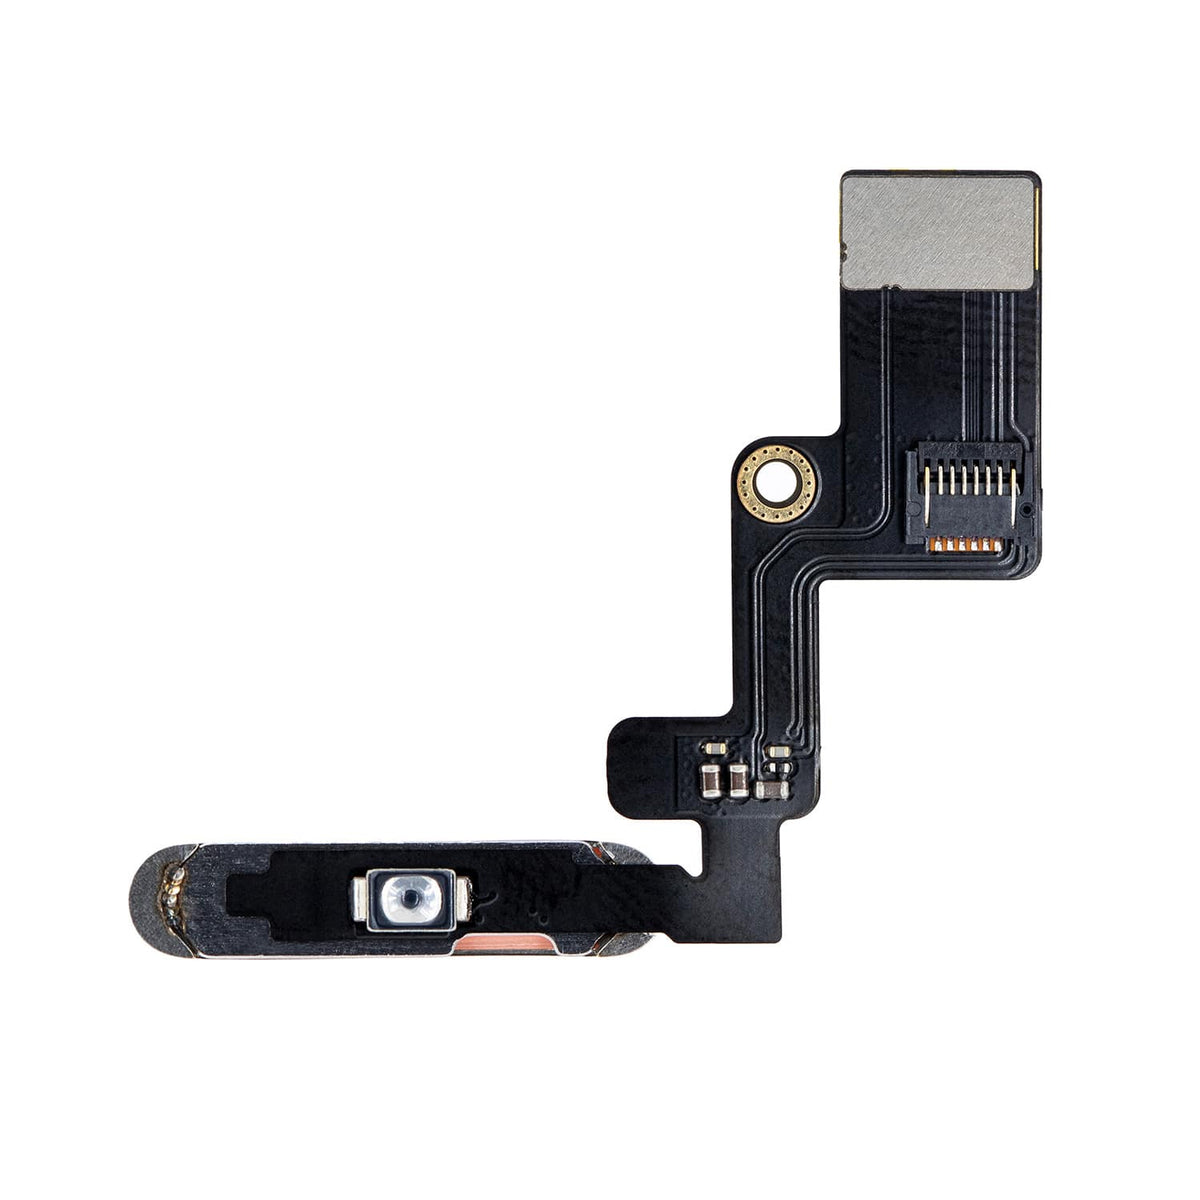 ROSE GOLD POWER BUTTON WITH FLEX CABLE FOR IPAD AIR 4/5